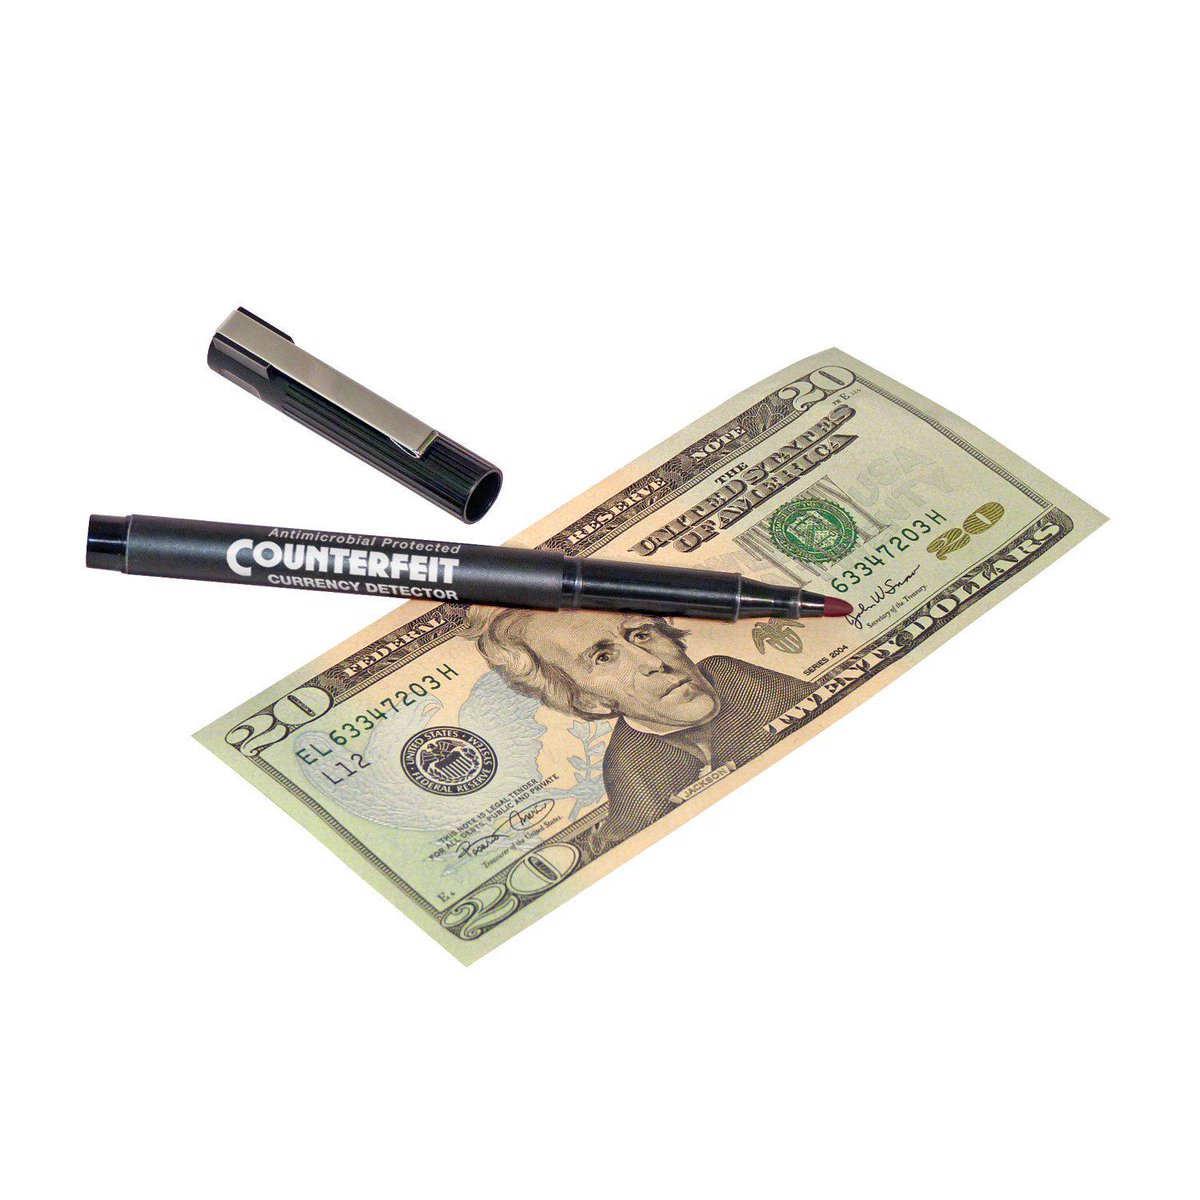 Don't take chance accepting #counterfeitbills, buy #MMFIndustries #Counterfeit Detector #Pen.
pinterest.com/pin/3407958967…